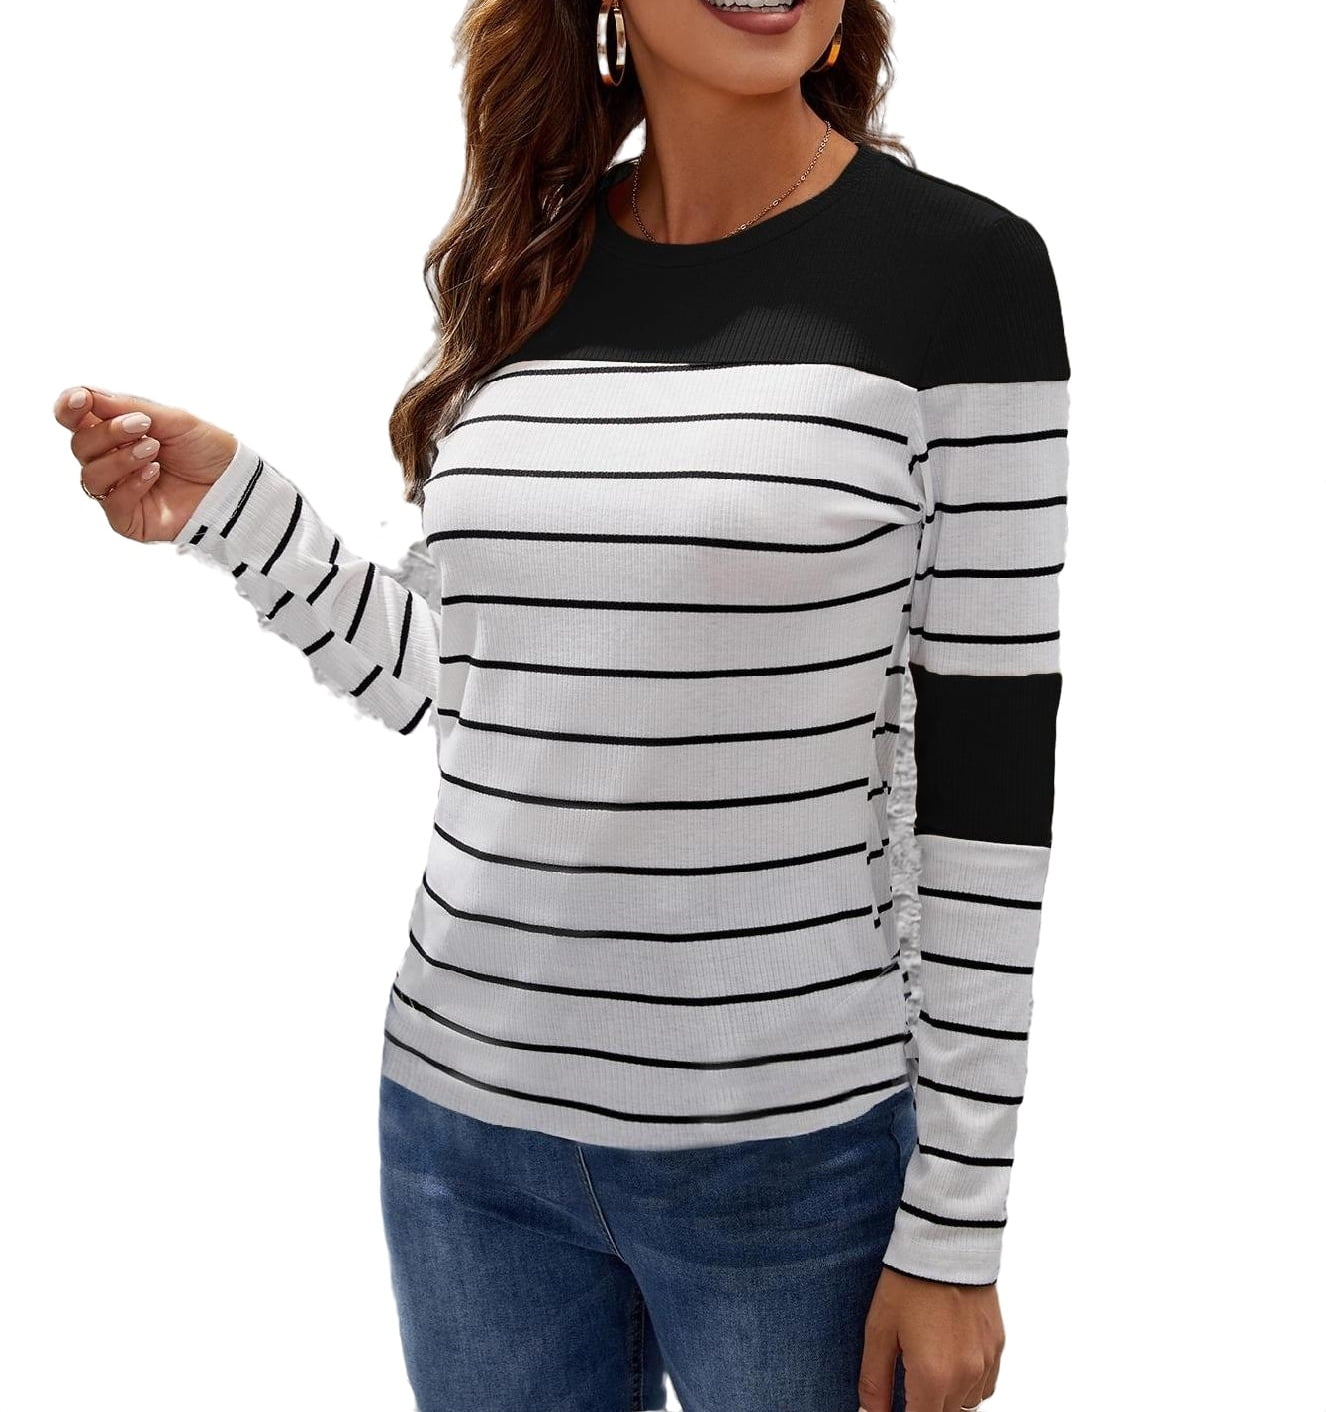 Casual Colorblock Round Neck Long Sleeve Black and White Women\'s T-Shirts ( Women\'s)